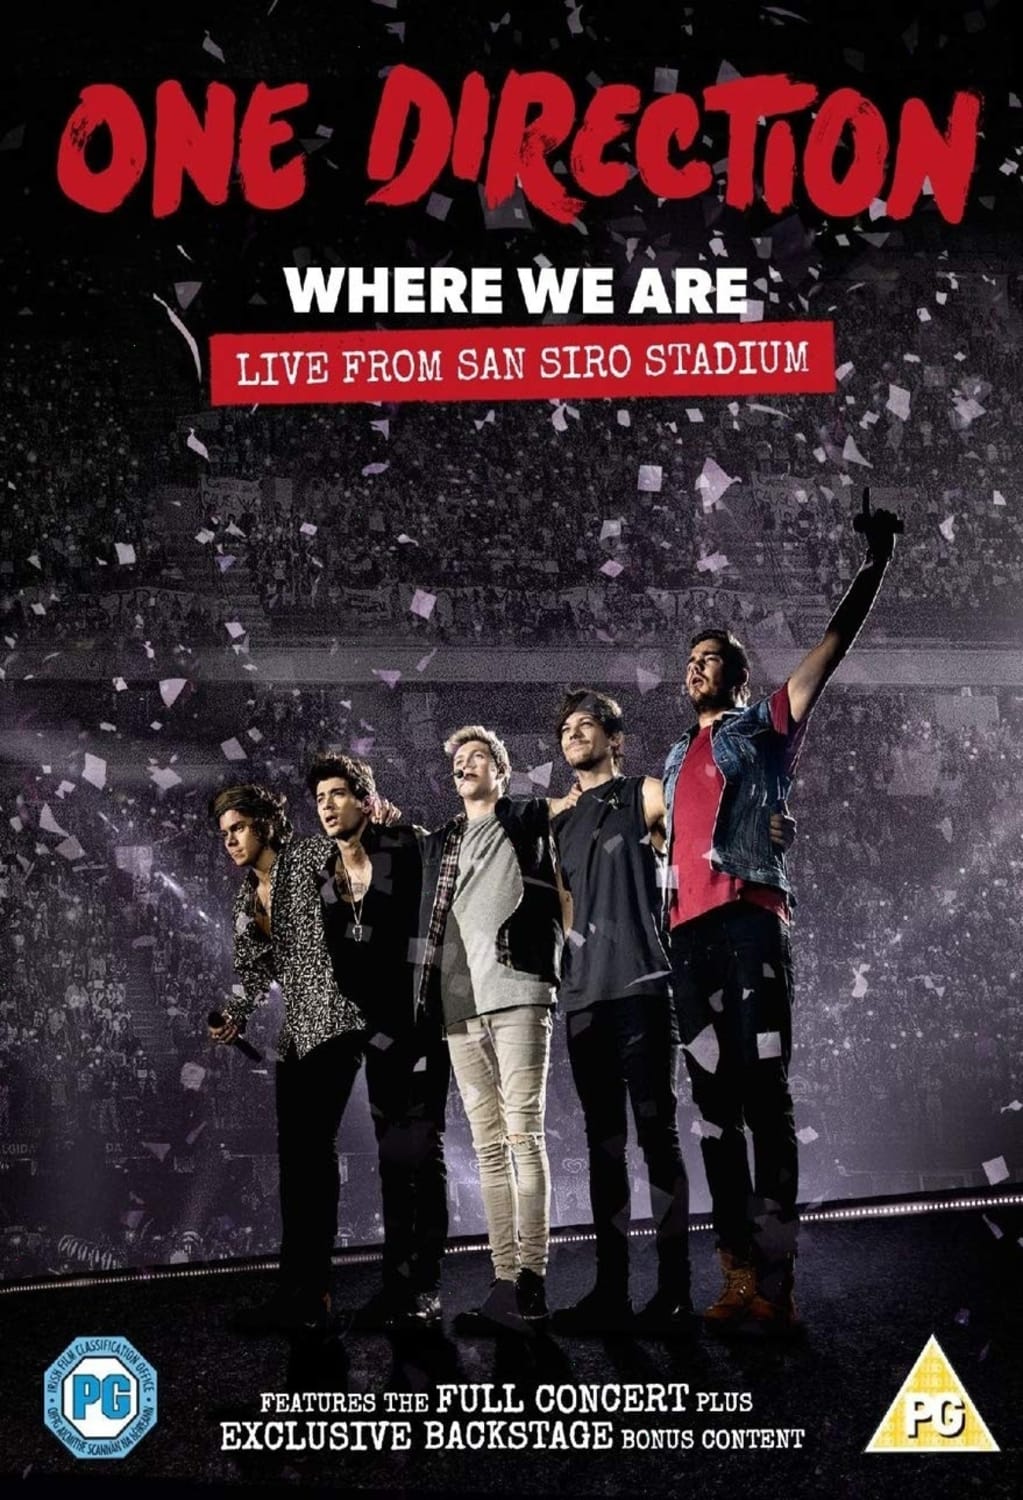 One Direction – Where We Are: Live From San Siro Stadium (DVD) on MovieShack